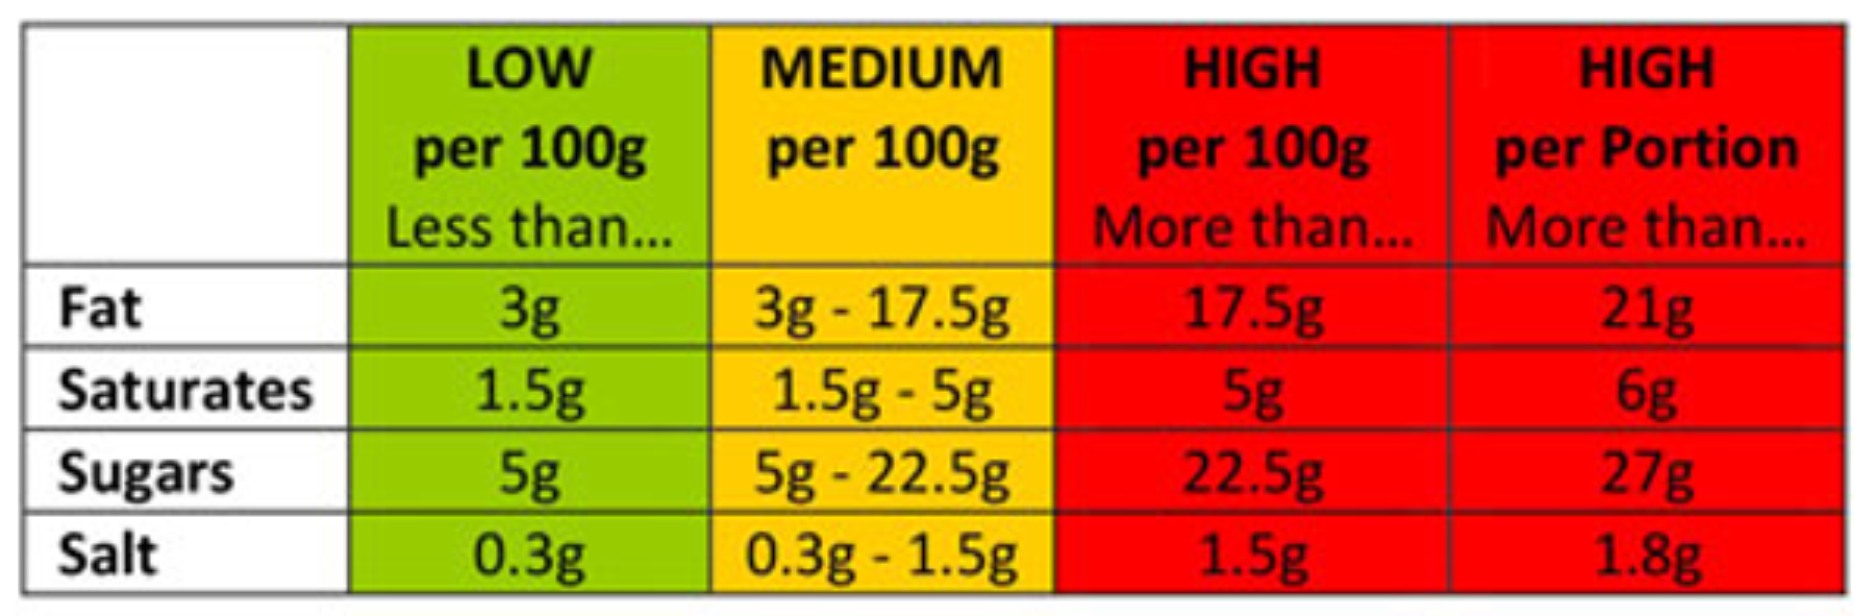 recommended fat grams for low fat diet